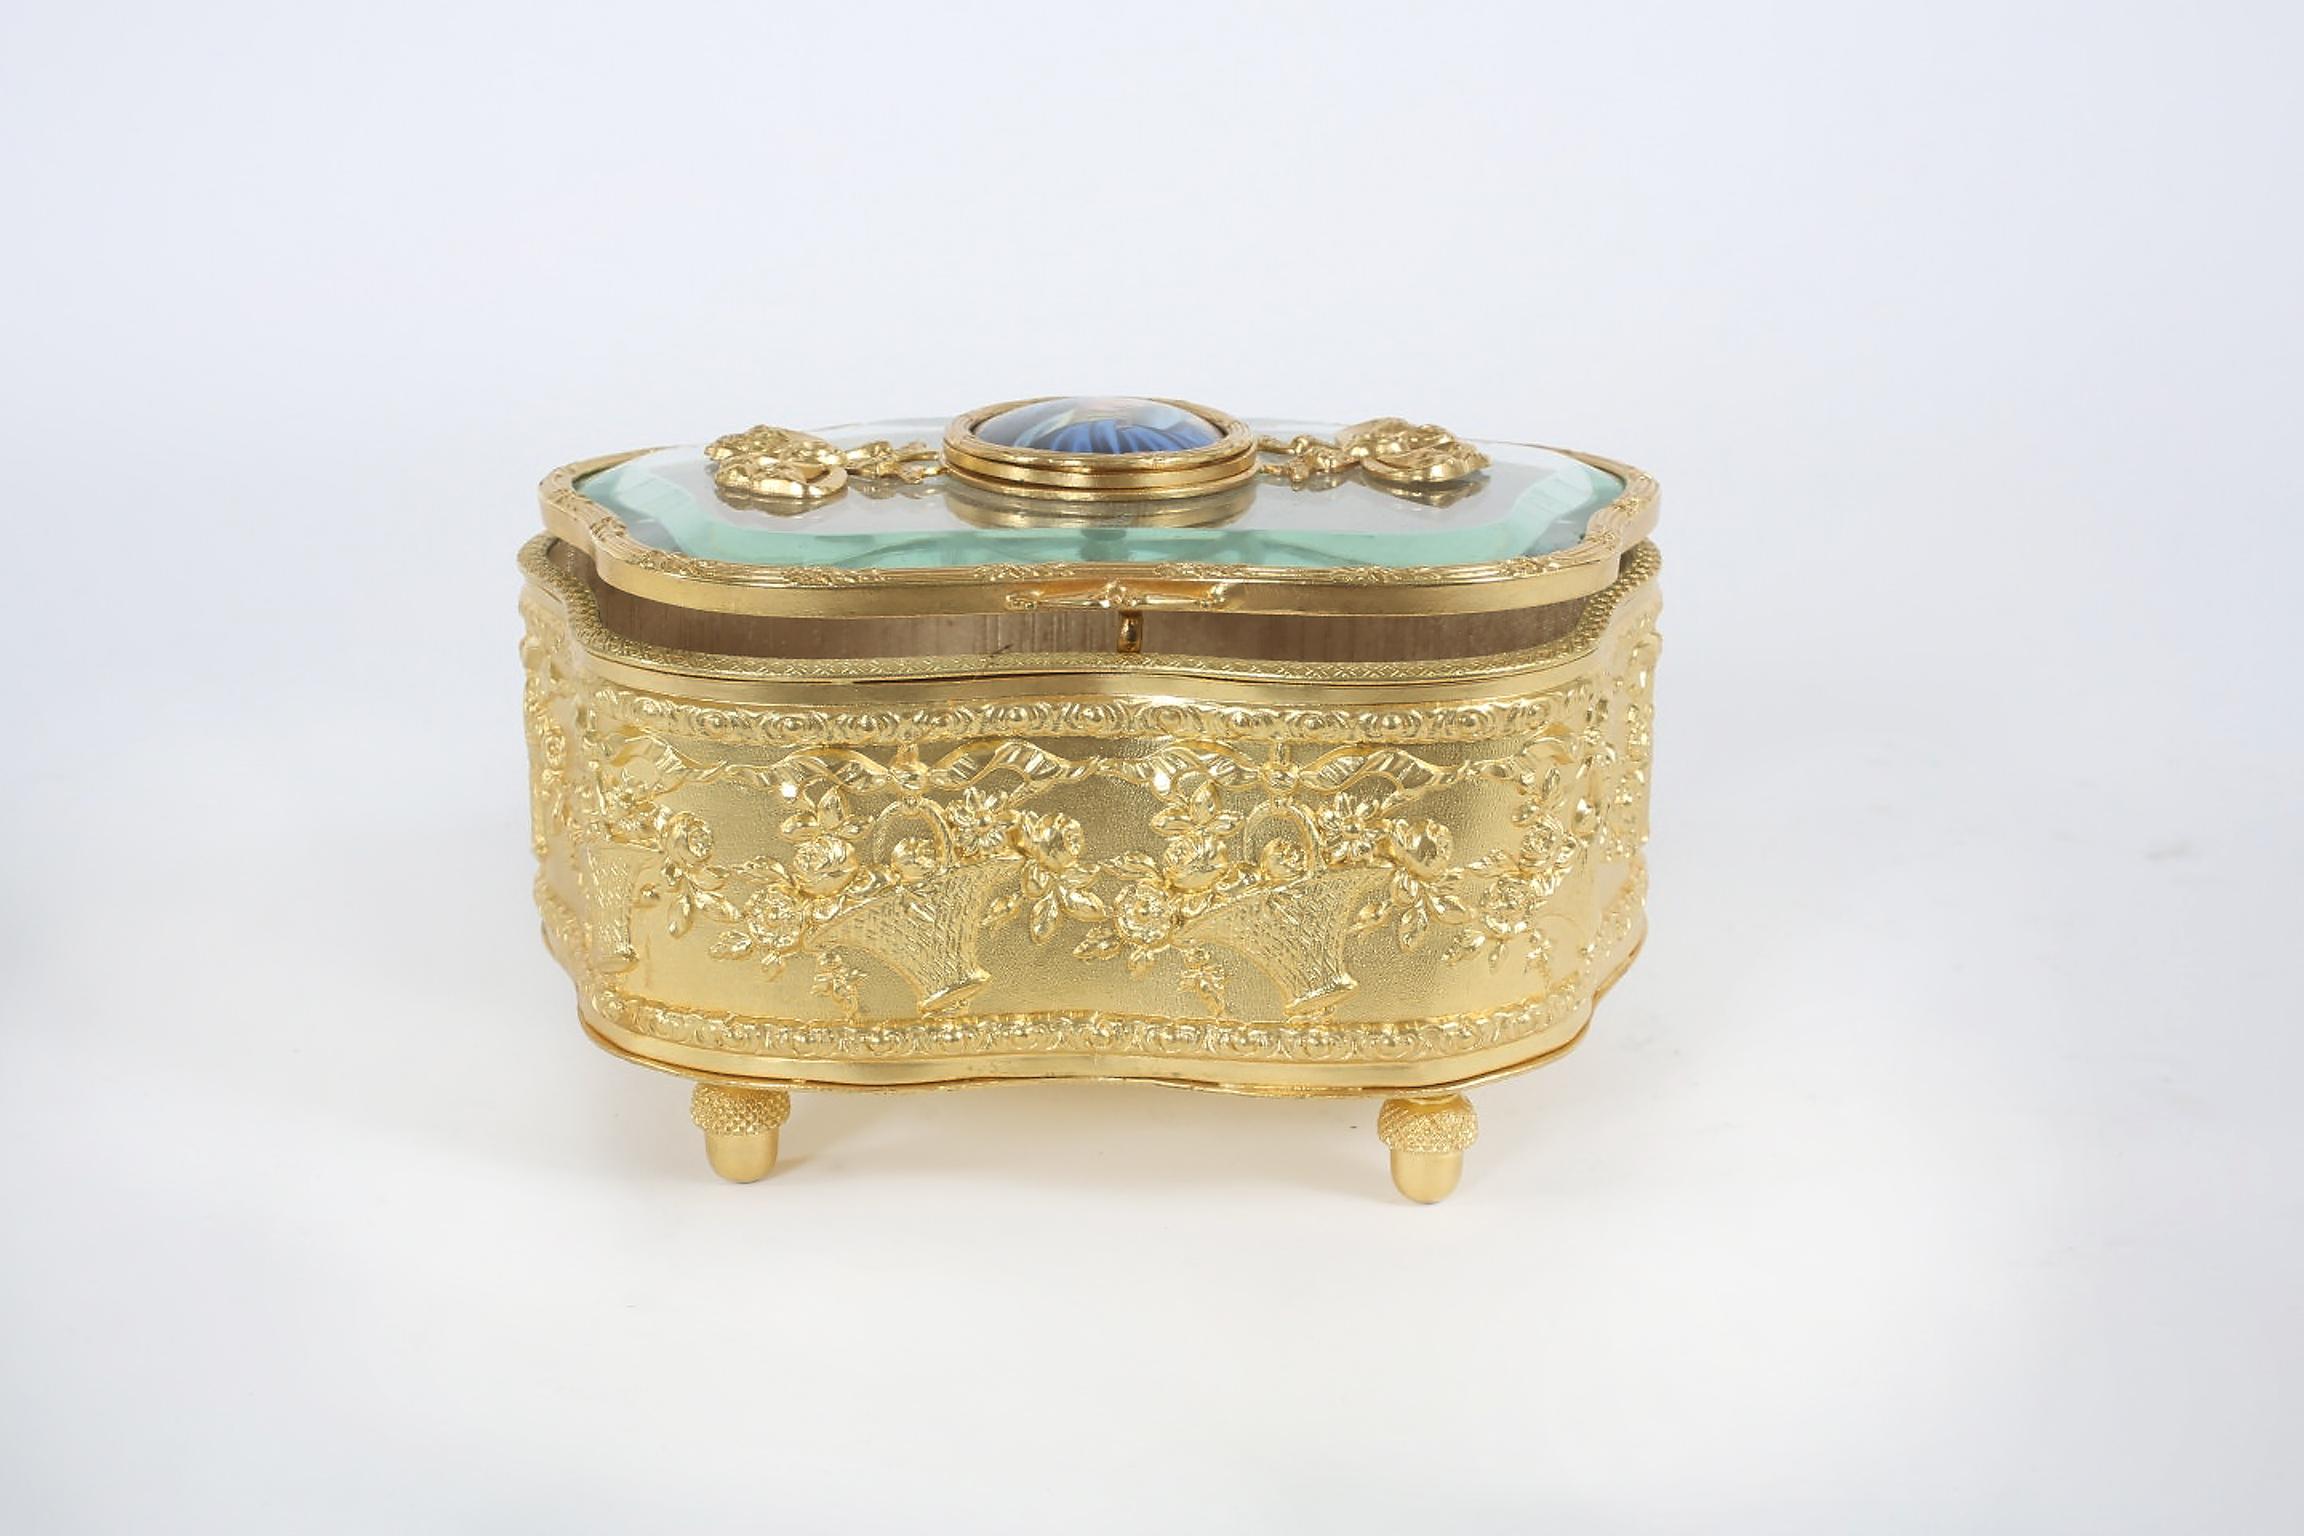 Ornately gilt gold decorative footed vanity box with central plaque of Madonna on the glass lid cover & gold fabric interior. The box is in great vintage condition. Minor wear consistent with age / use. The box stand about 6.25